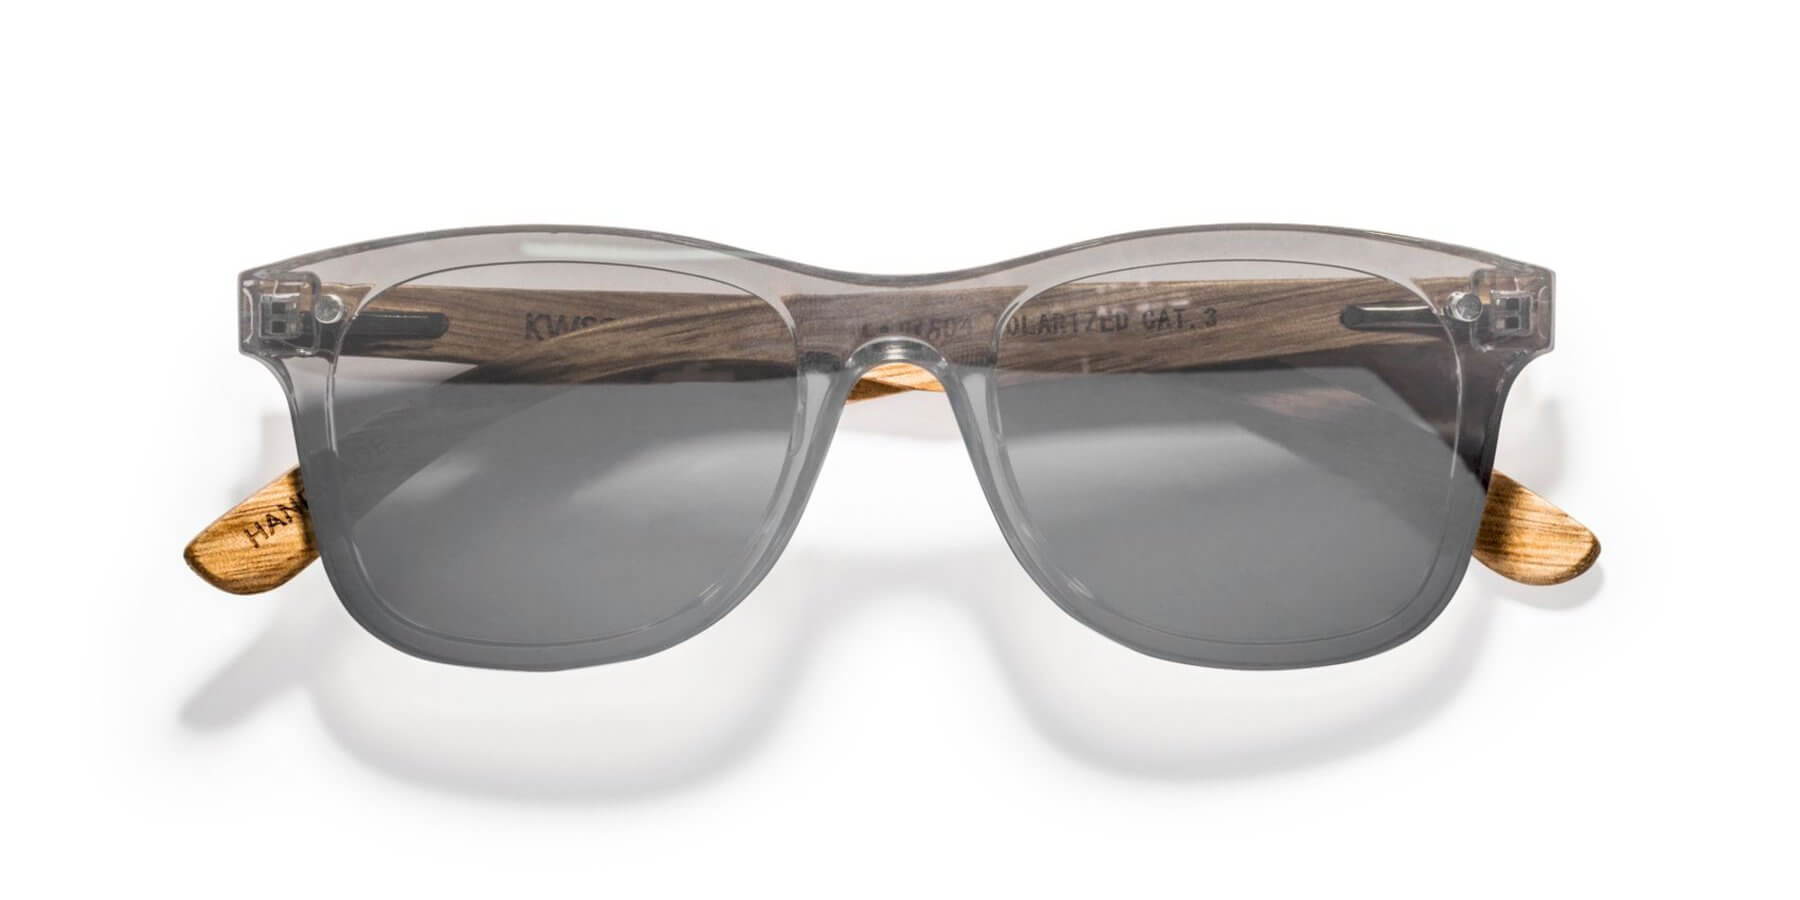 Kraywoods Rover, reflective Sunglasses made from Zebra wood with polarized mirrored lenses